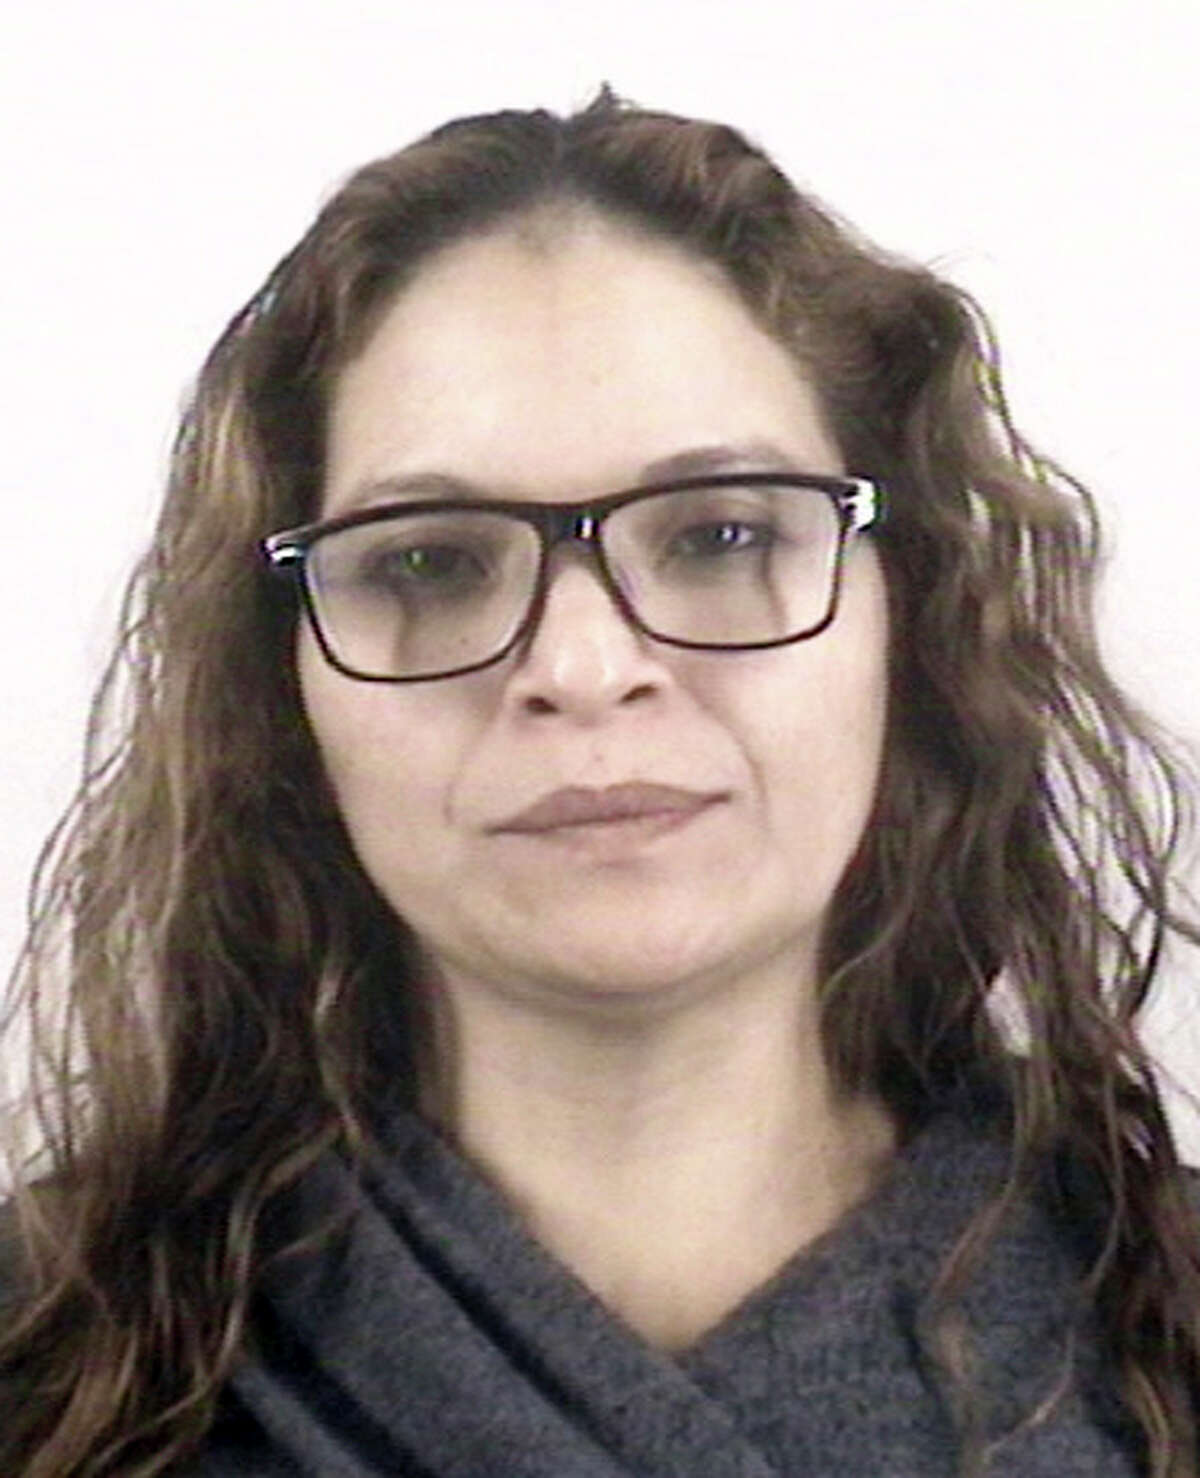 This photo provided by Tarrant County, Texas office shows Rosa Maria Ortega. Ortega, 37, was convicted in Fort Worth this week on two felony counts of illegal voting over allegations that she improperly cast a ballot five times between 2005 and 2014. Her attorney, Clark Birdsall, said Friday, Feb. 10, 2017, that Ortega was a U.S. permanent resident who mistakenly thought she was eligible to vote. He said she voted Republican, including for Texas Attorney General Ken Paxton, whose office helped prosecute her. (Tarrant County, Texas via AP)